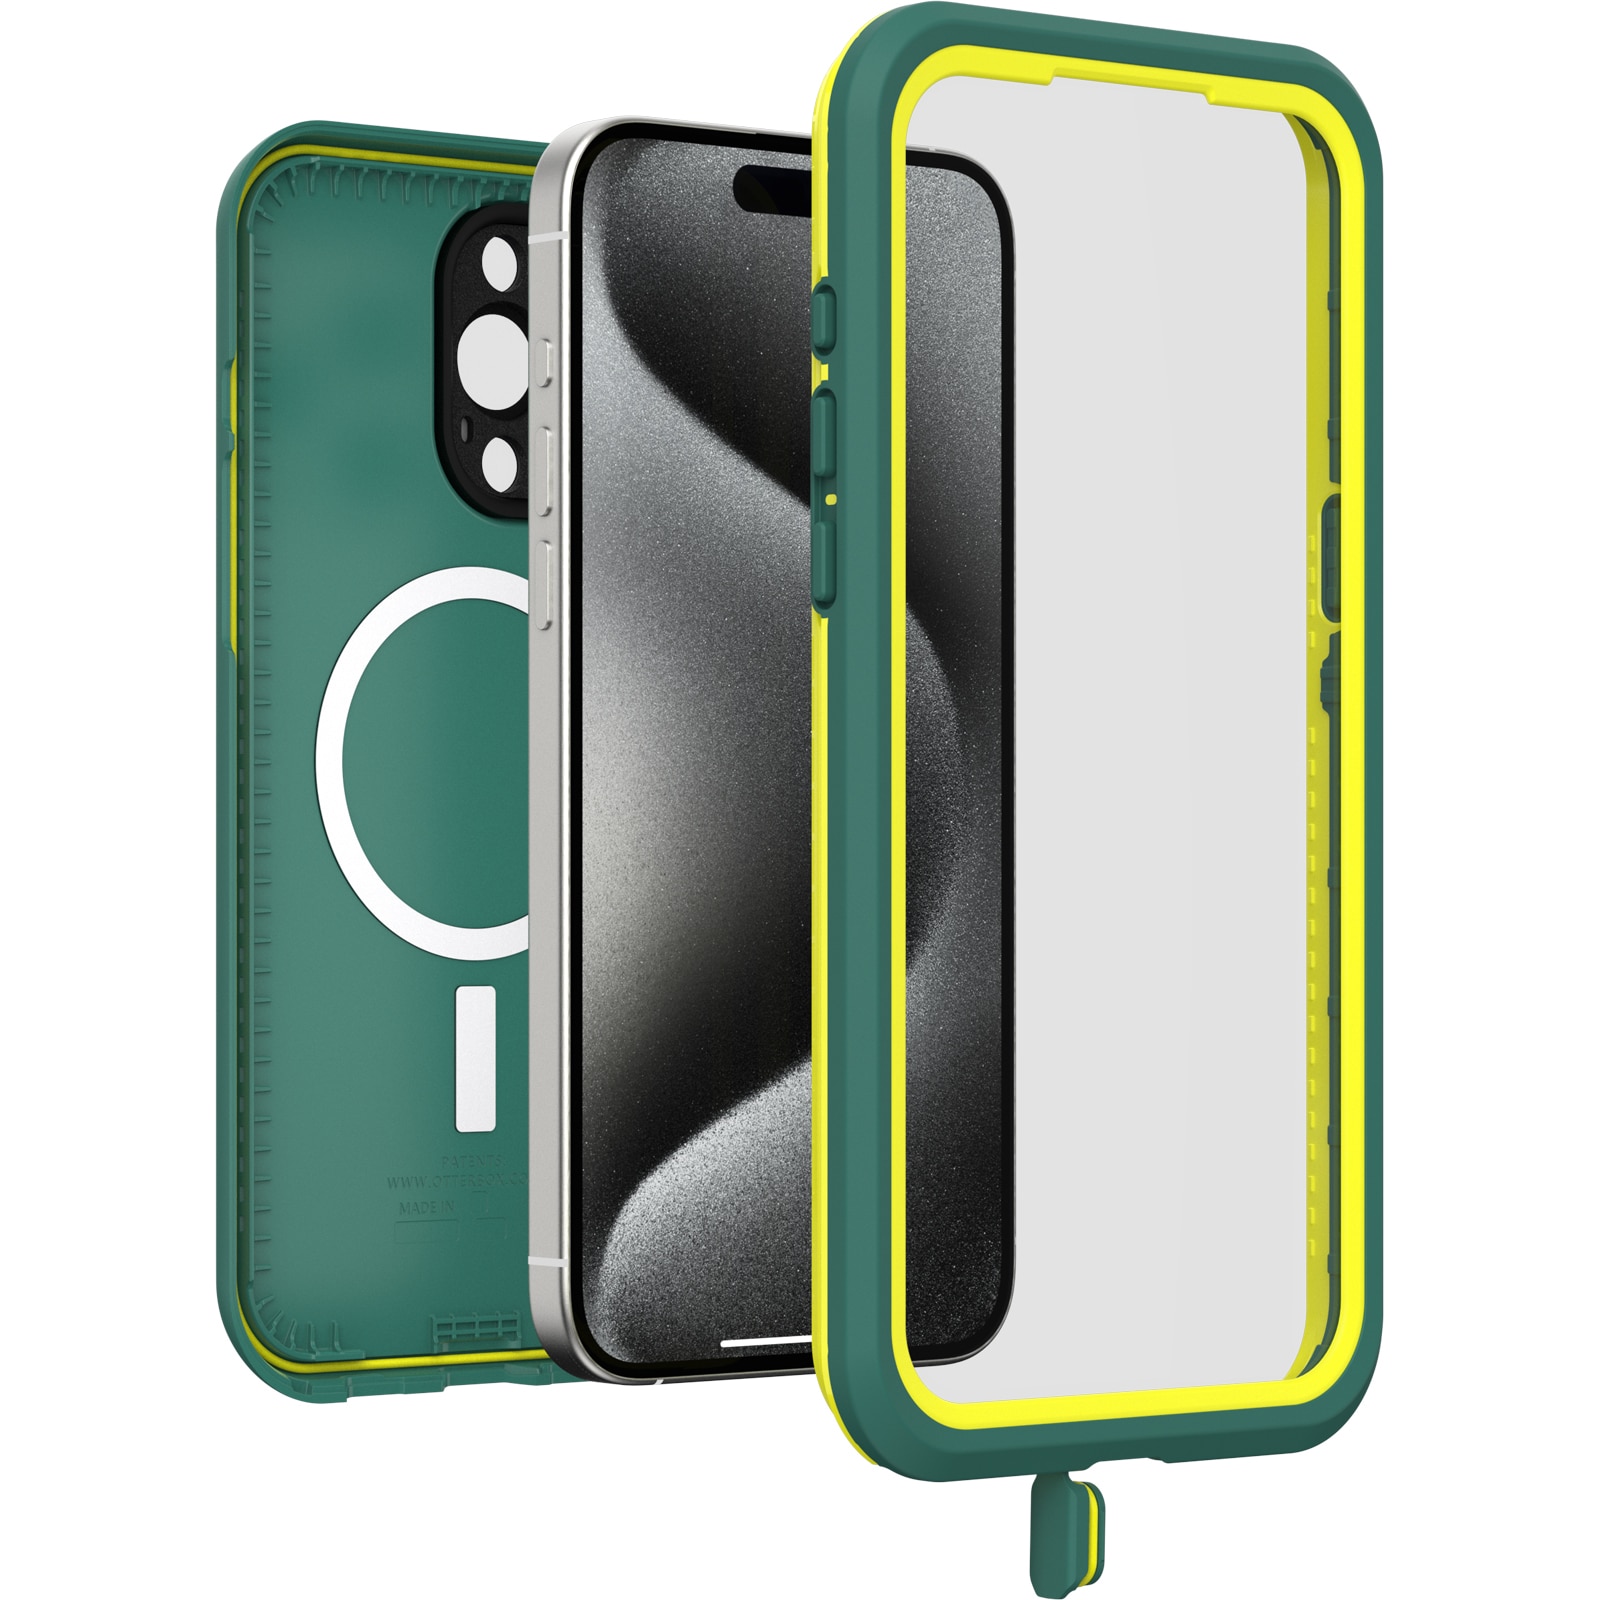 FRE MagSafe Cover iPhone 15 Pro Max Green